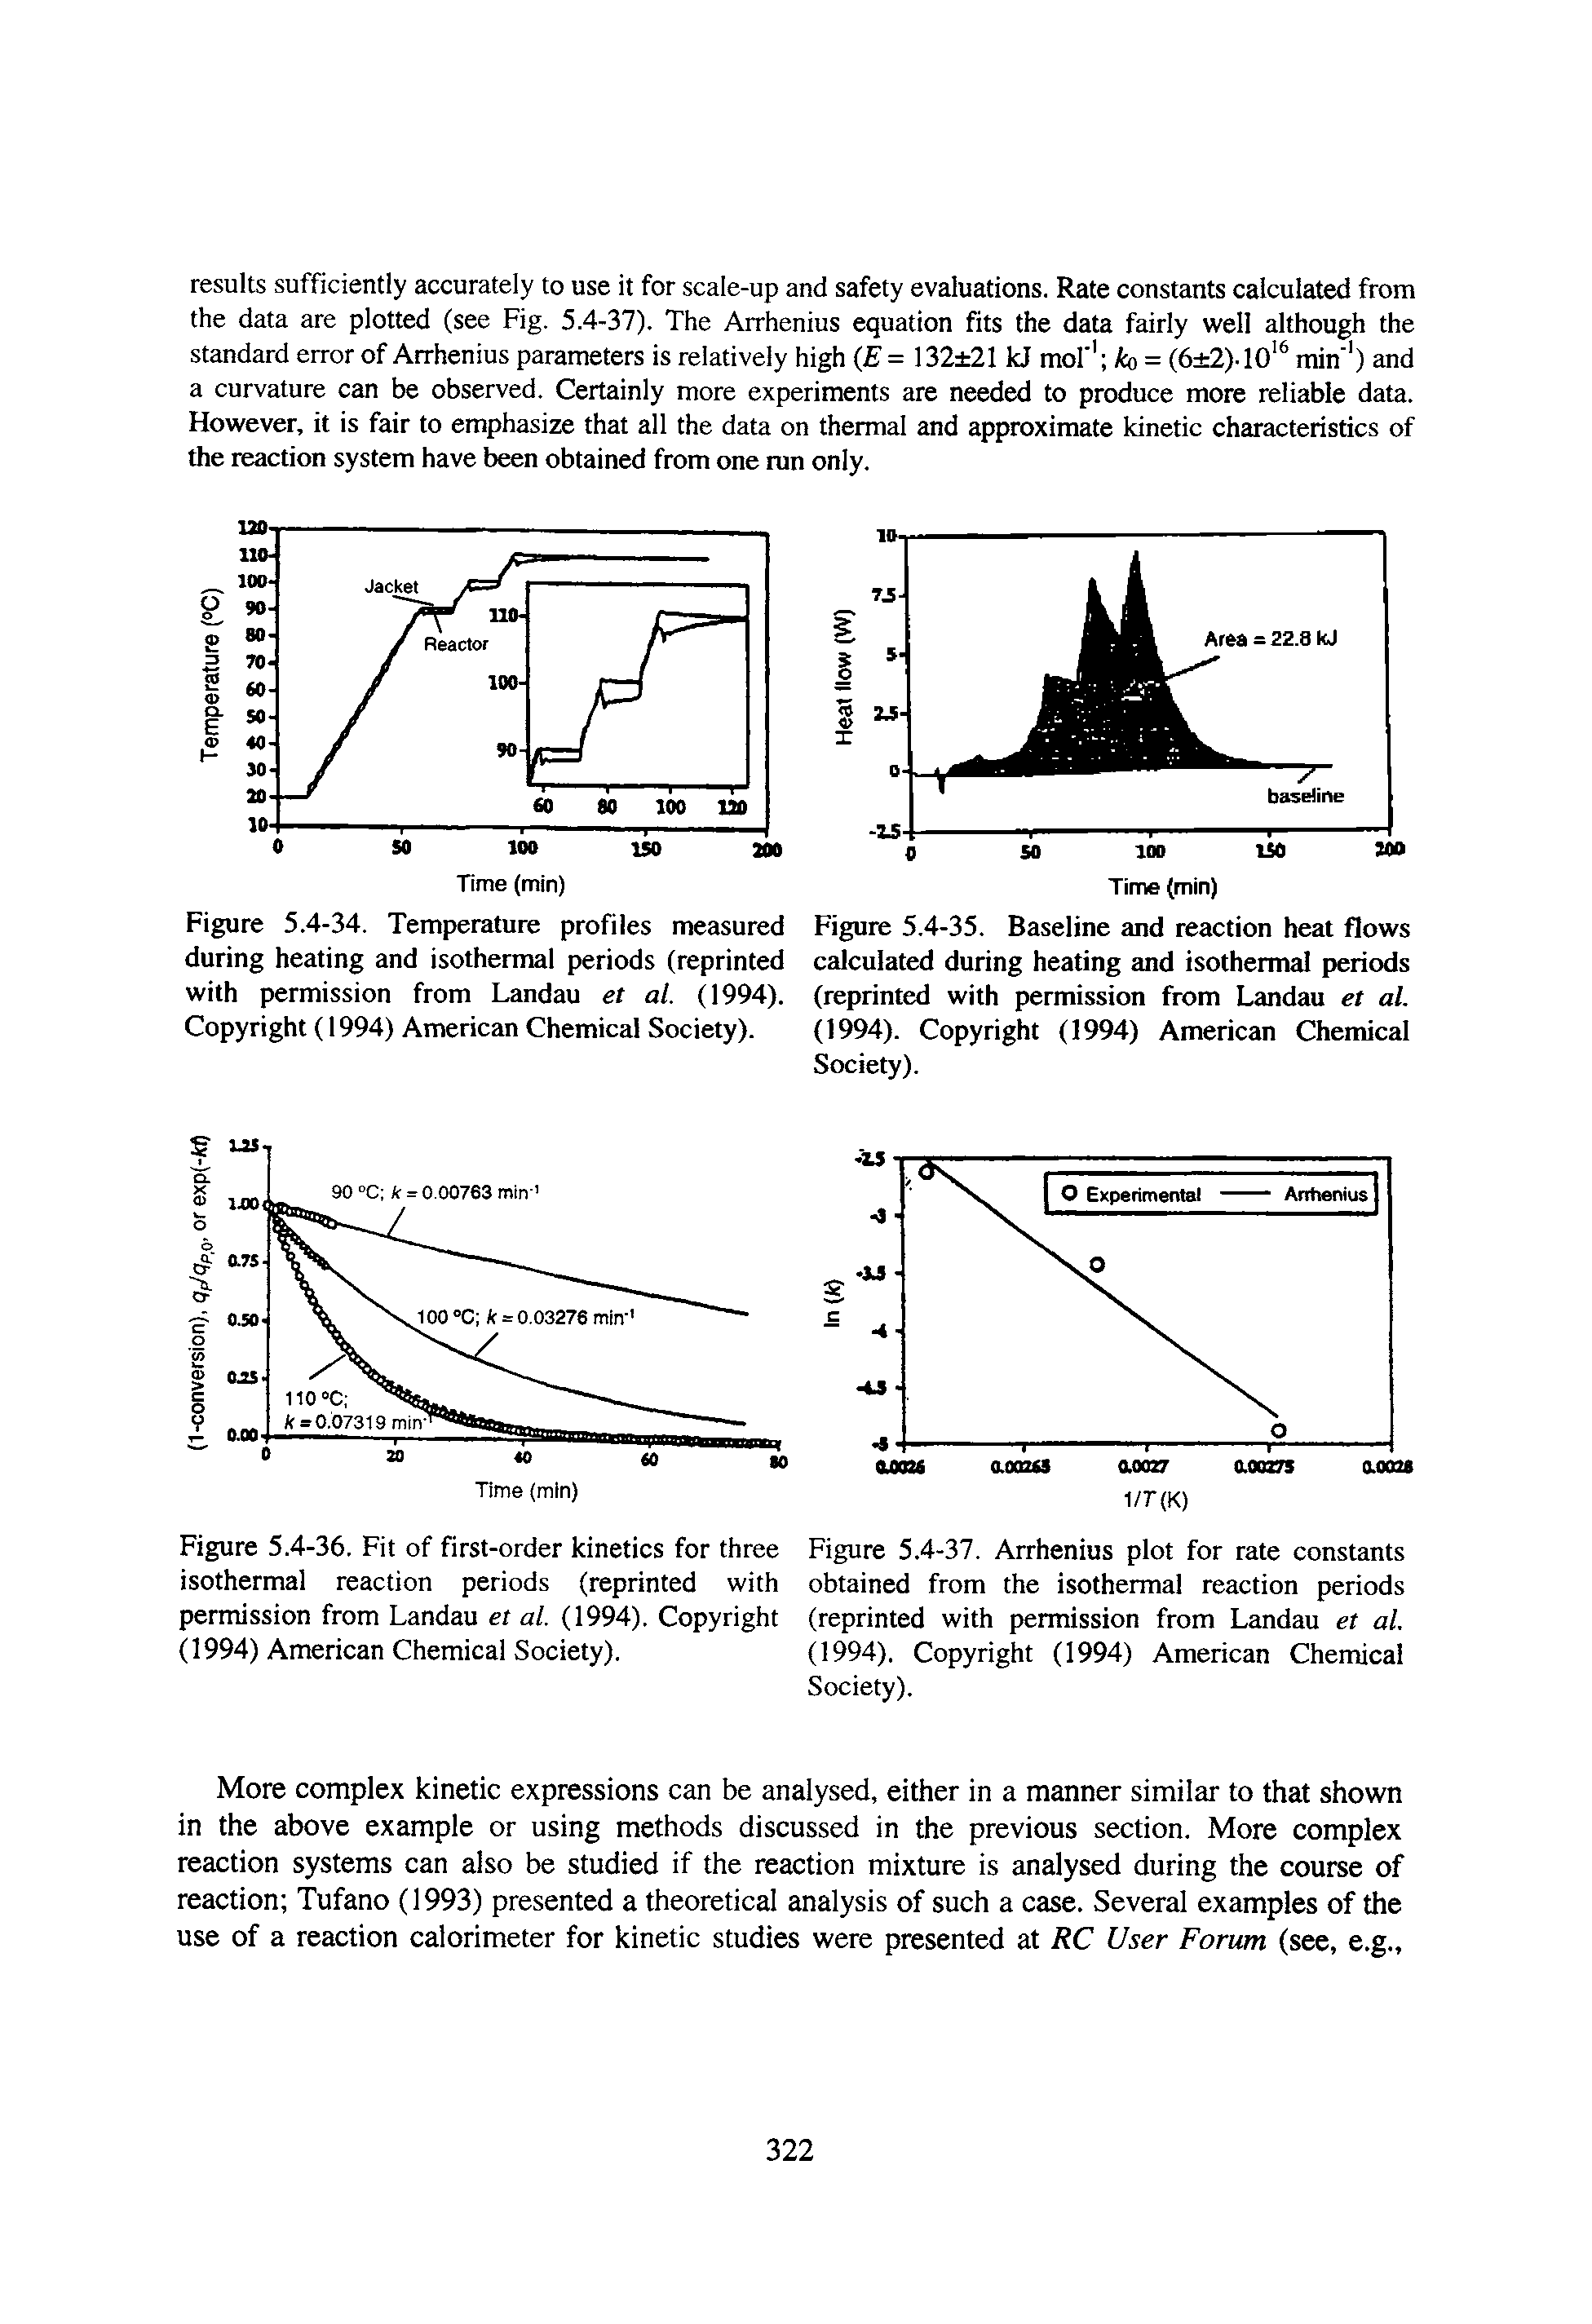 Figure 5.4-36. Fit of first-order kinetics for three Figure 5.4-37. Arrhenius plot for rate constants isothermal reaction periods (reprinted with obtained from the isothermal reaction periods permission from Landau et al. (1994). Copyright (reprinted with permission from Landau et al. (1994) American Chemical Society). (1994). Copyright (1994) American Chemical...